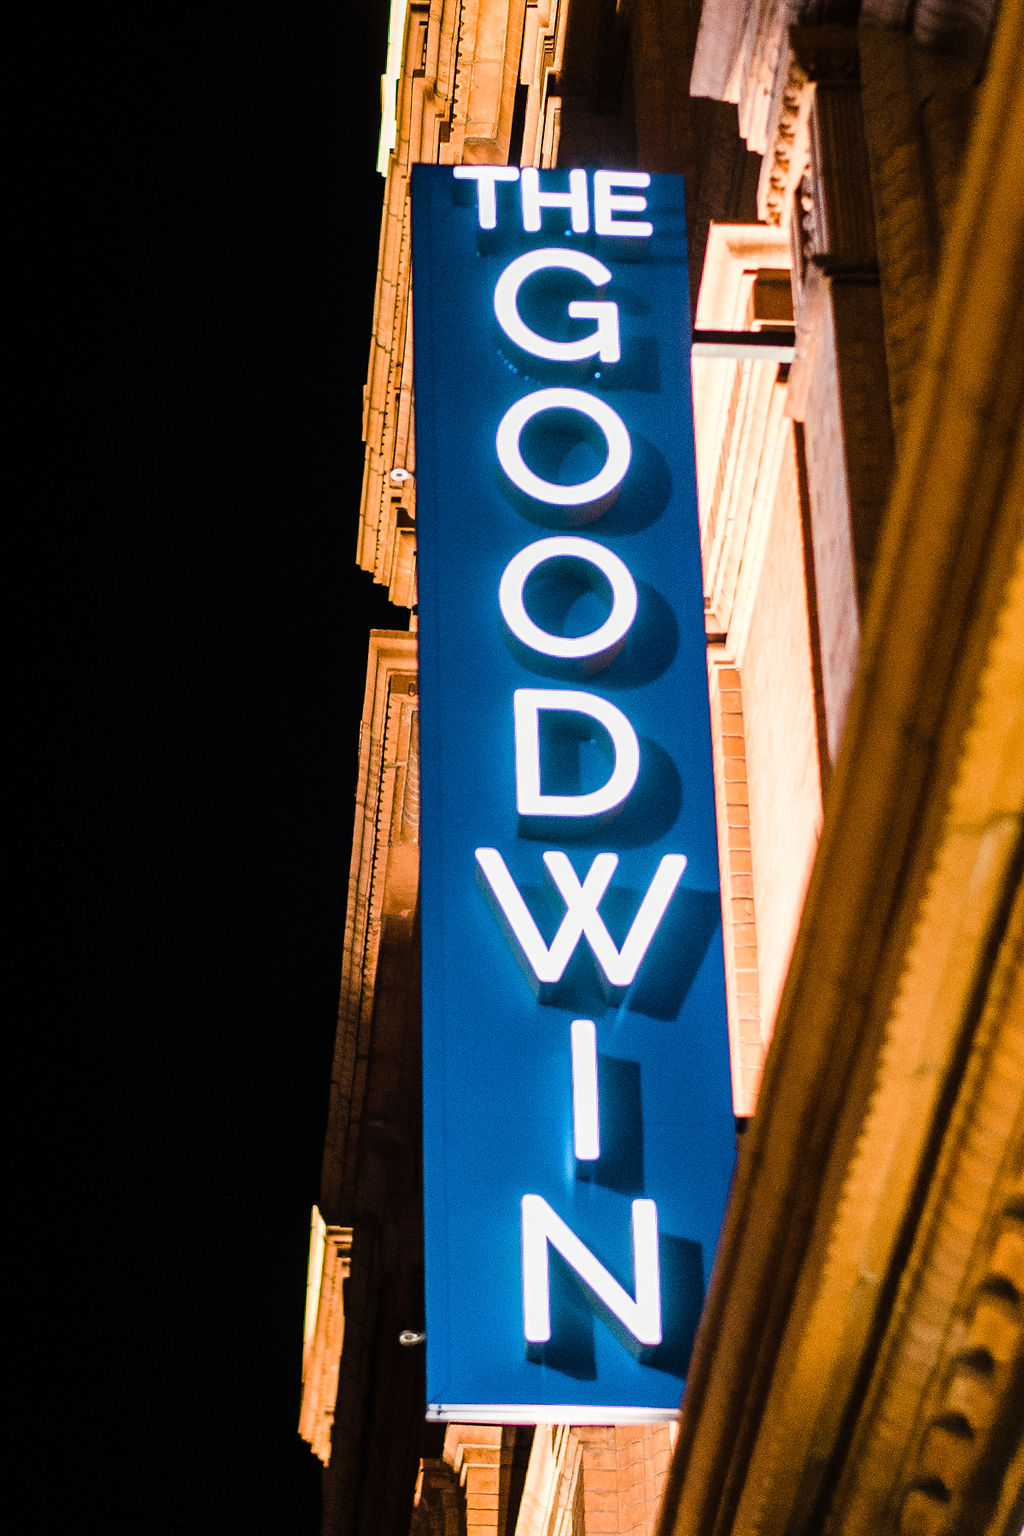 Melanie &amp; Tyler Anderson's wedding at The Goodwin Hotel Hartford, CT - Pearl Weddings &amp; Events